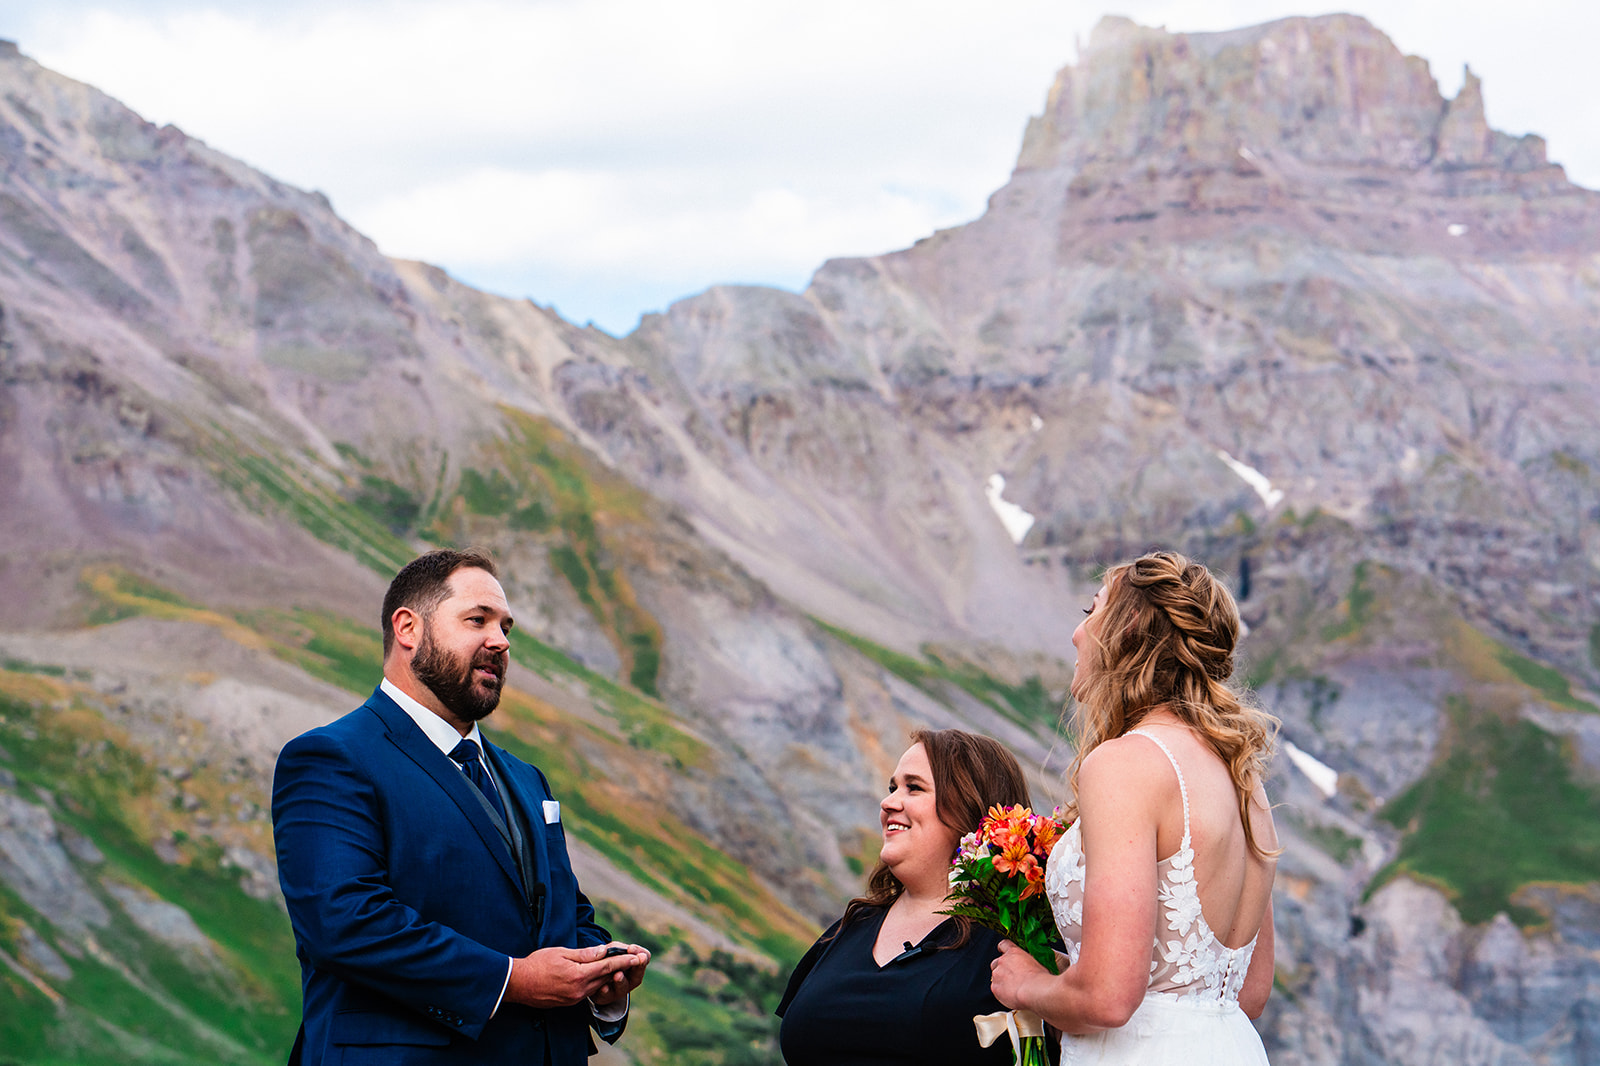 Bride and groom exchanging vows at the Yankee Boy Basin in Colorado